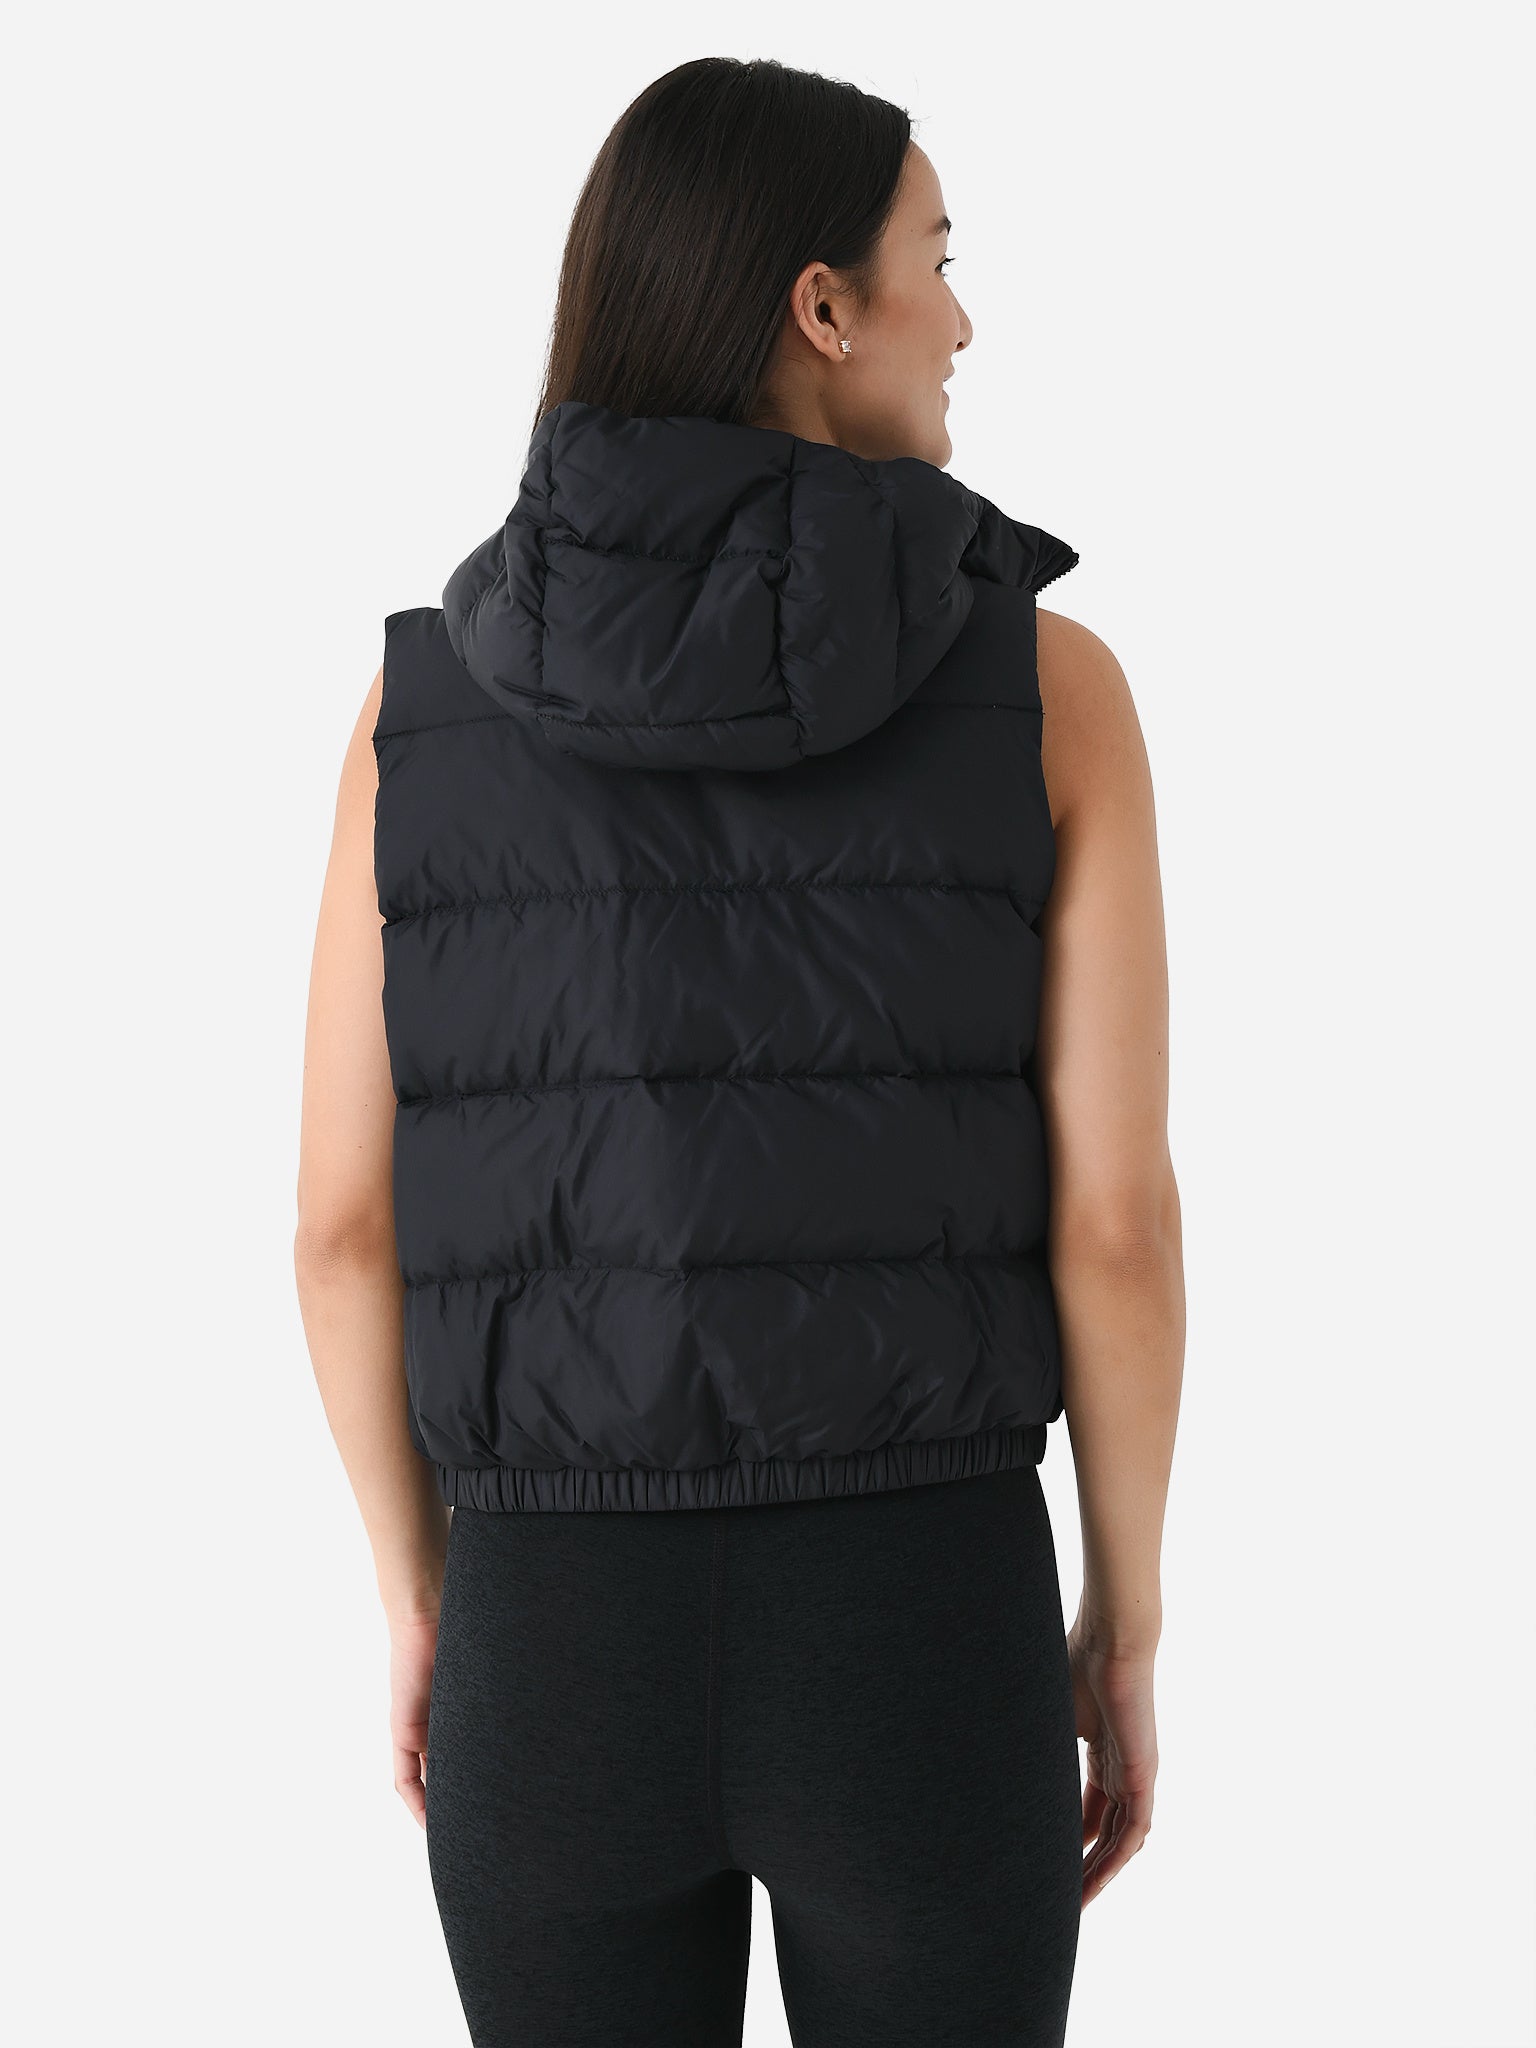 Women\'s – North The Hydrenalite™ Vest Down Face